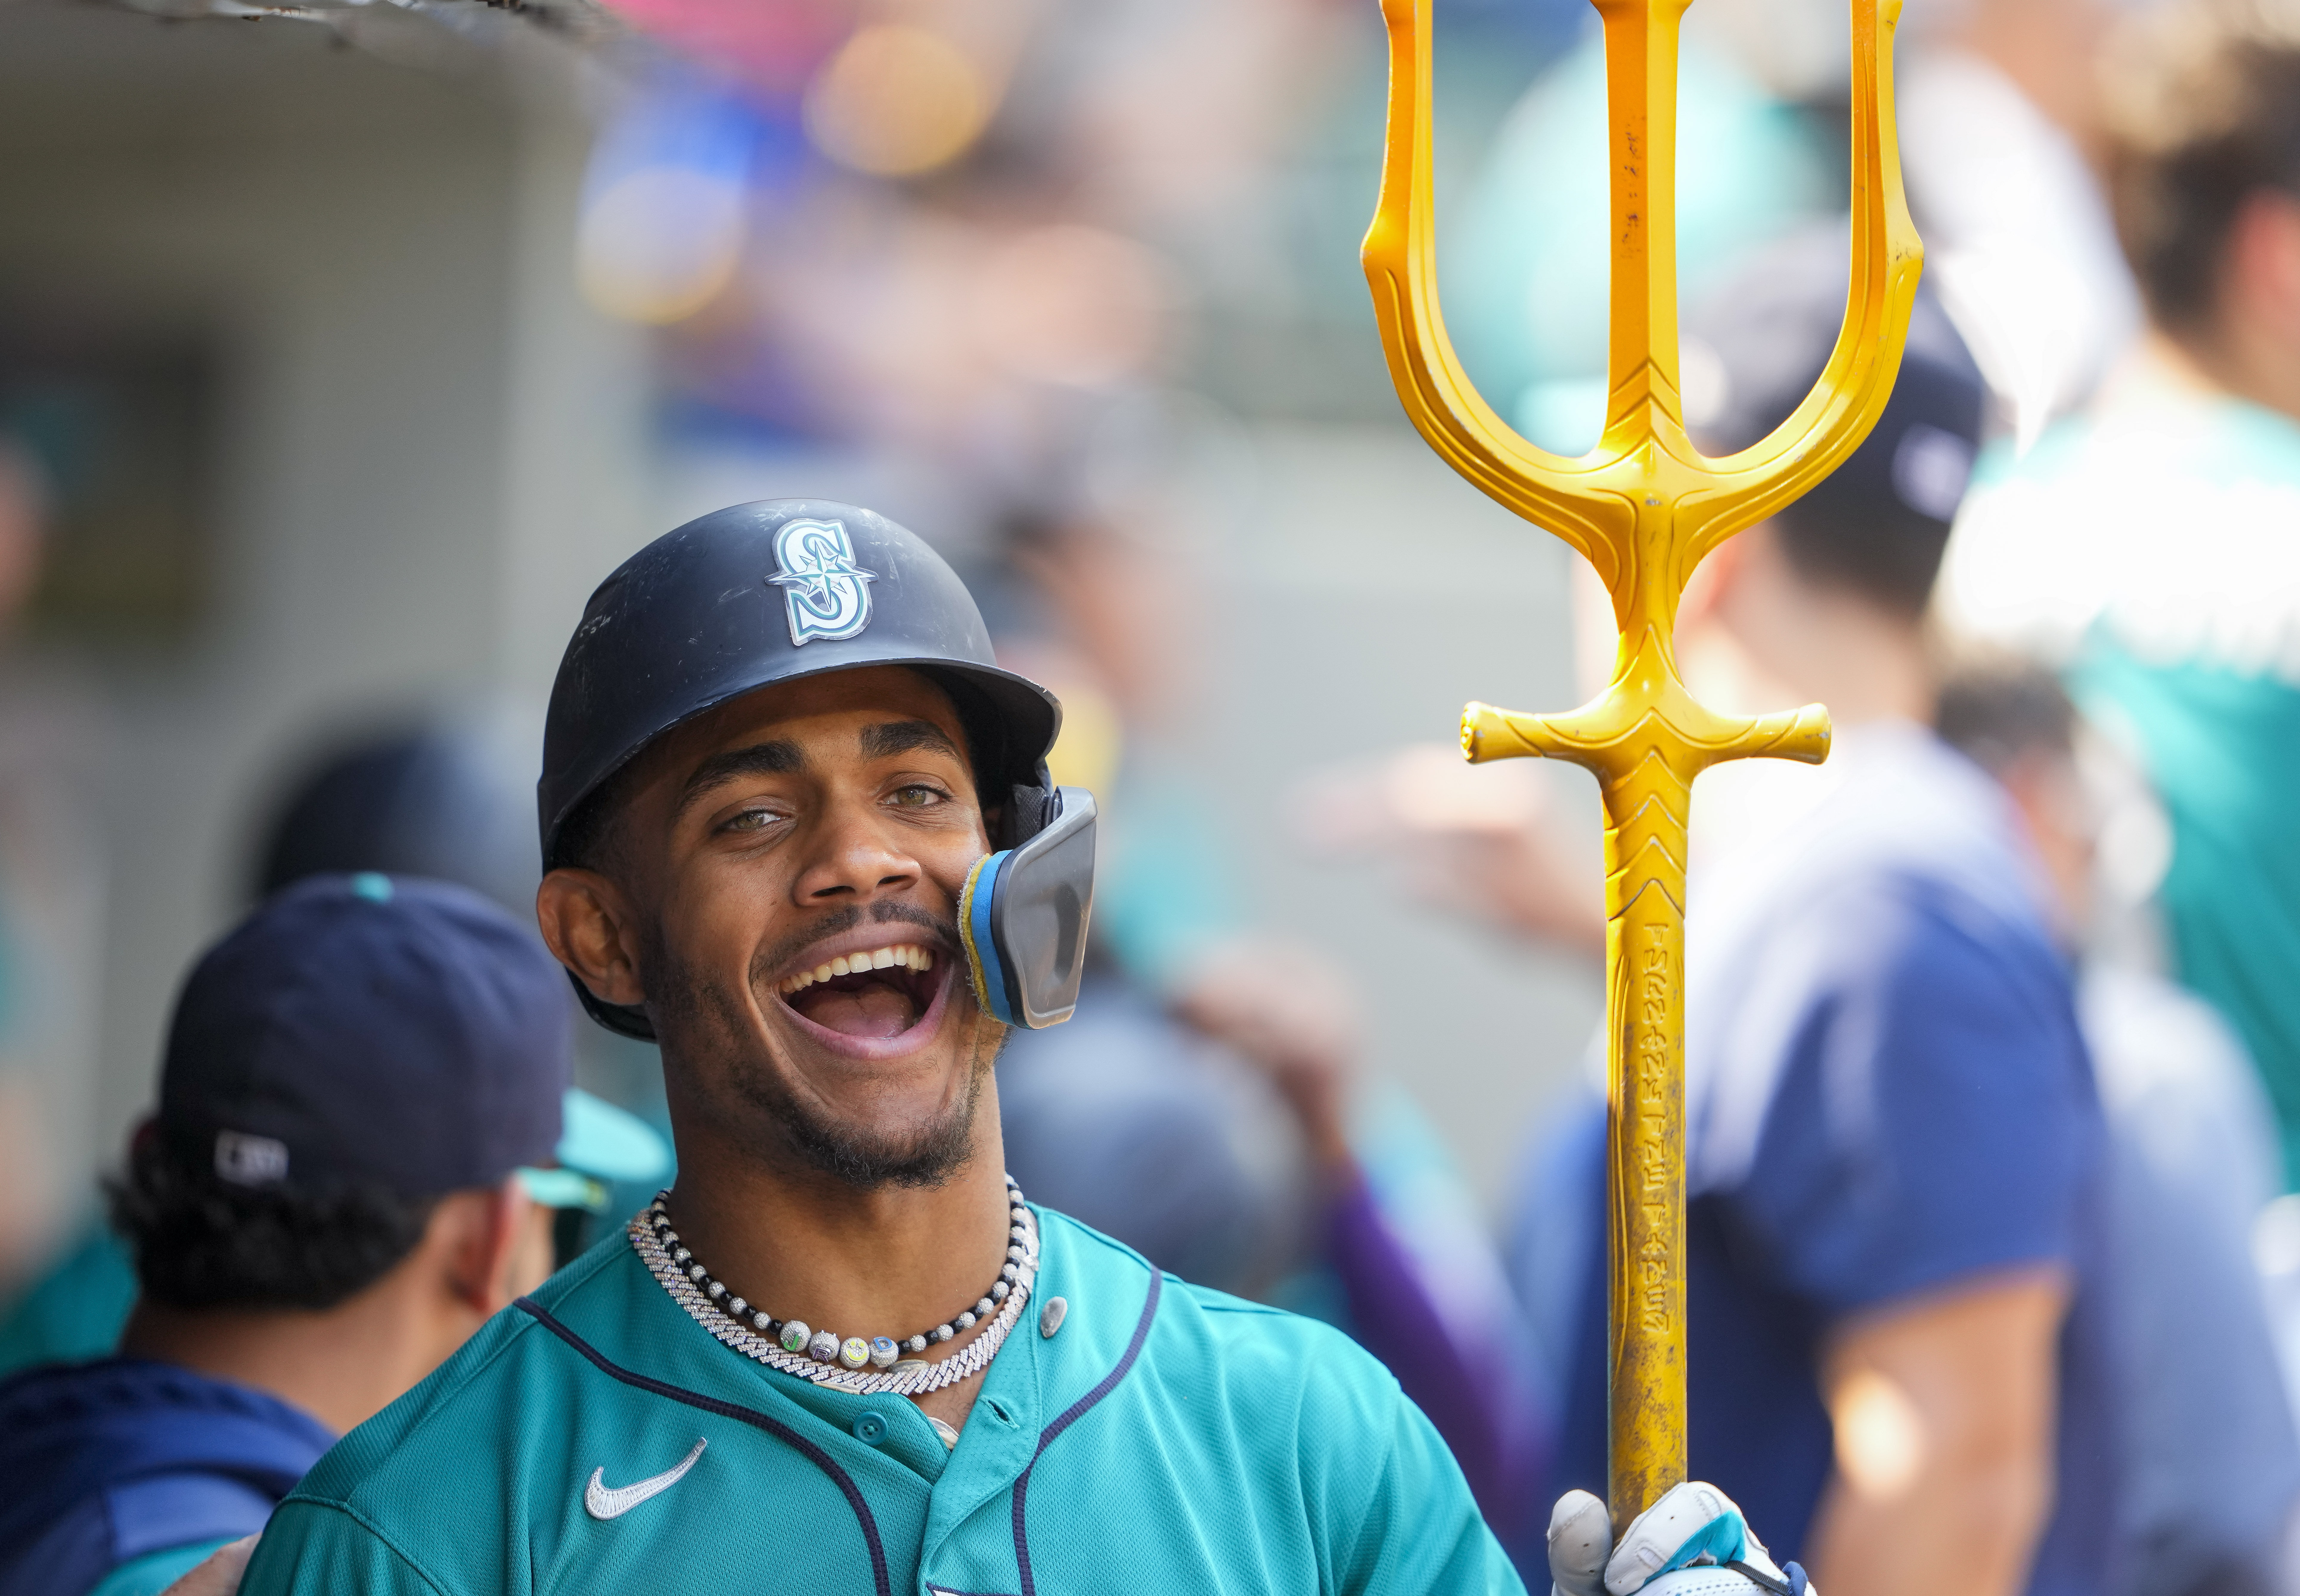 Mariners close out a record August by sending A's to their 95th defeat